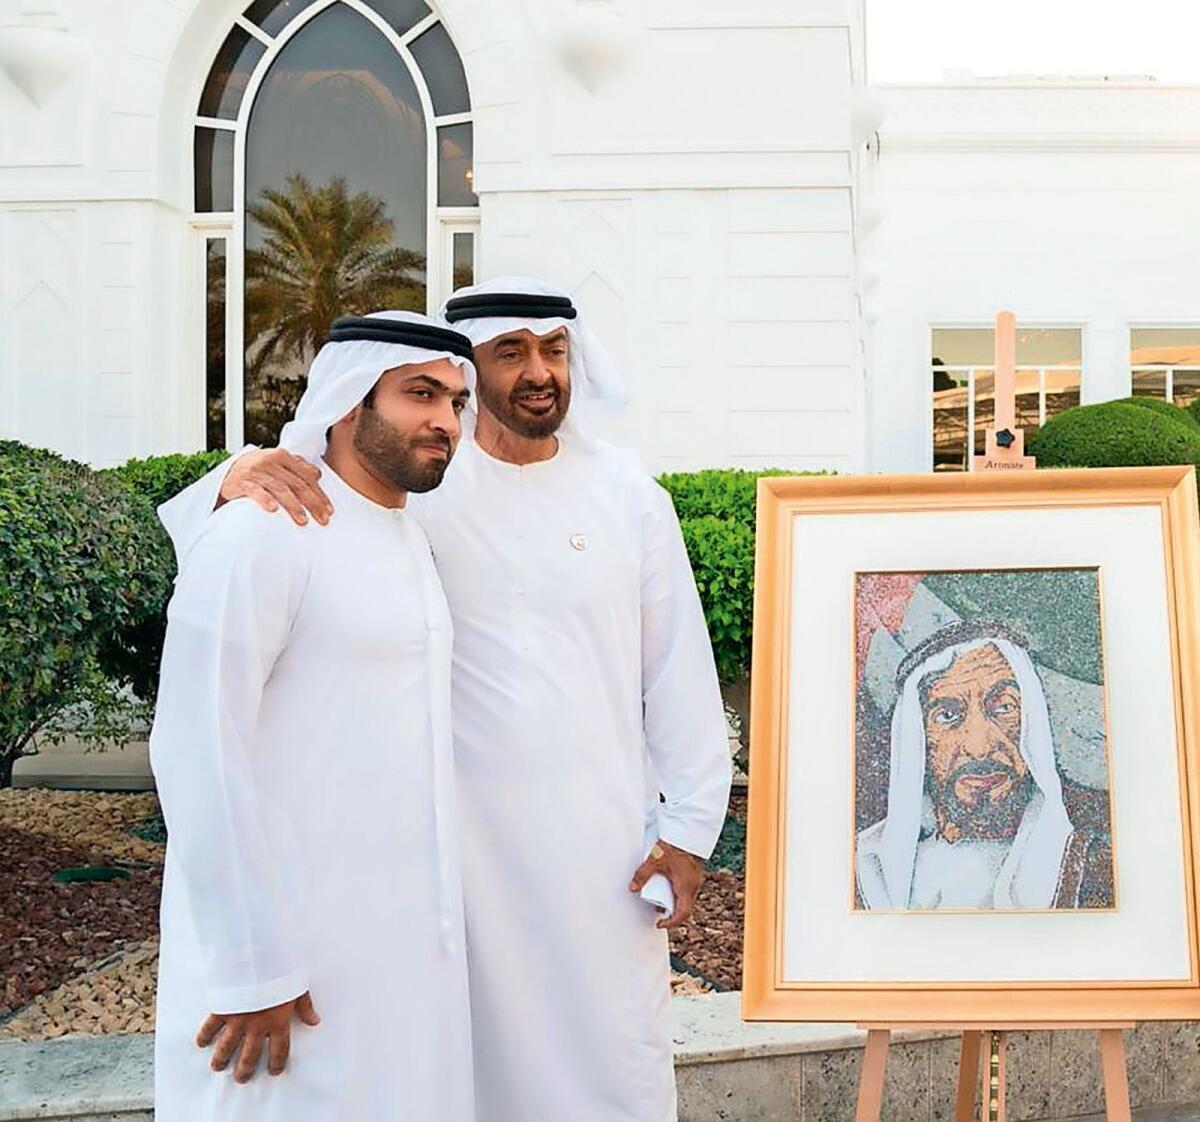 President Sheikh Mohamed bin Zayed Al Nahyan and Mohammed Abdullatif Galadari, Group Chief Executive Officer and Co-Chairman of Galadari Brothers, with Dh1 million portrait of the late Sheikh Zayed bin Sultan Al Nahyan.